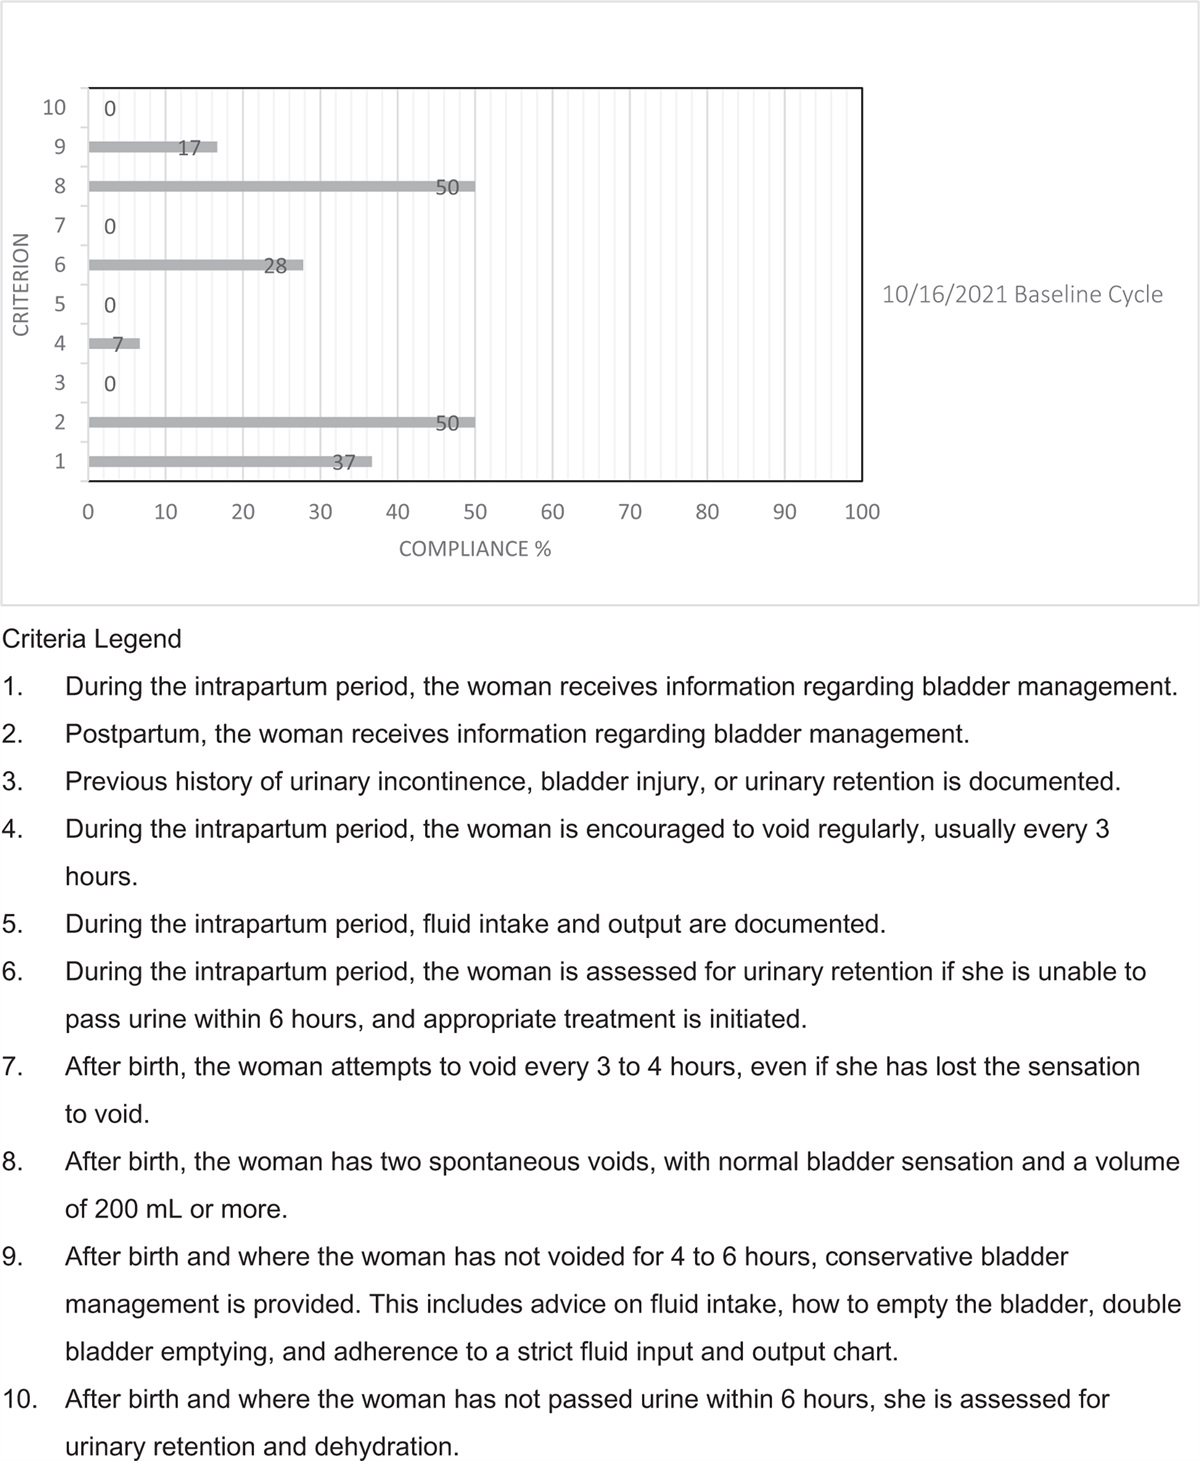 Enhancing bladder management for intrapartum/postpartum women at a maternity hospital in Taiwan: a best practice implementation project